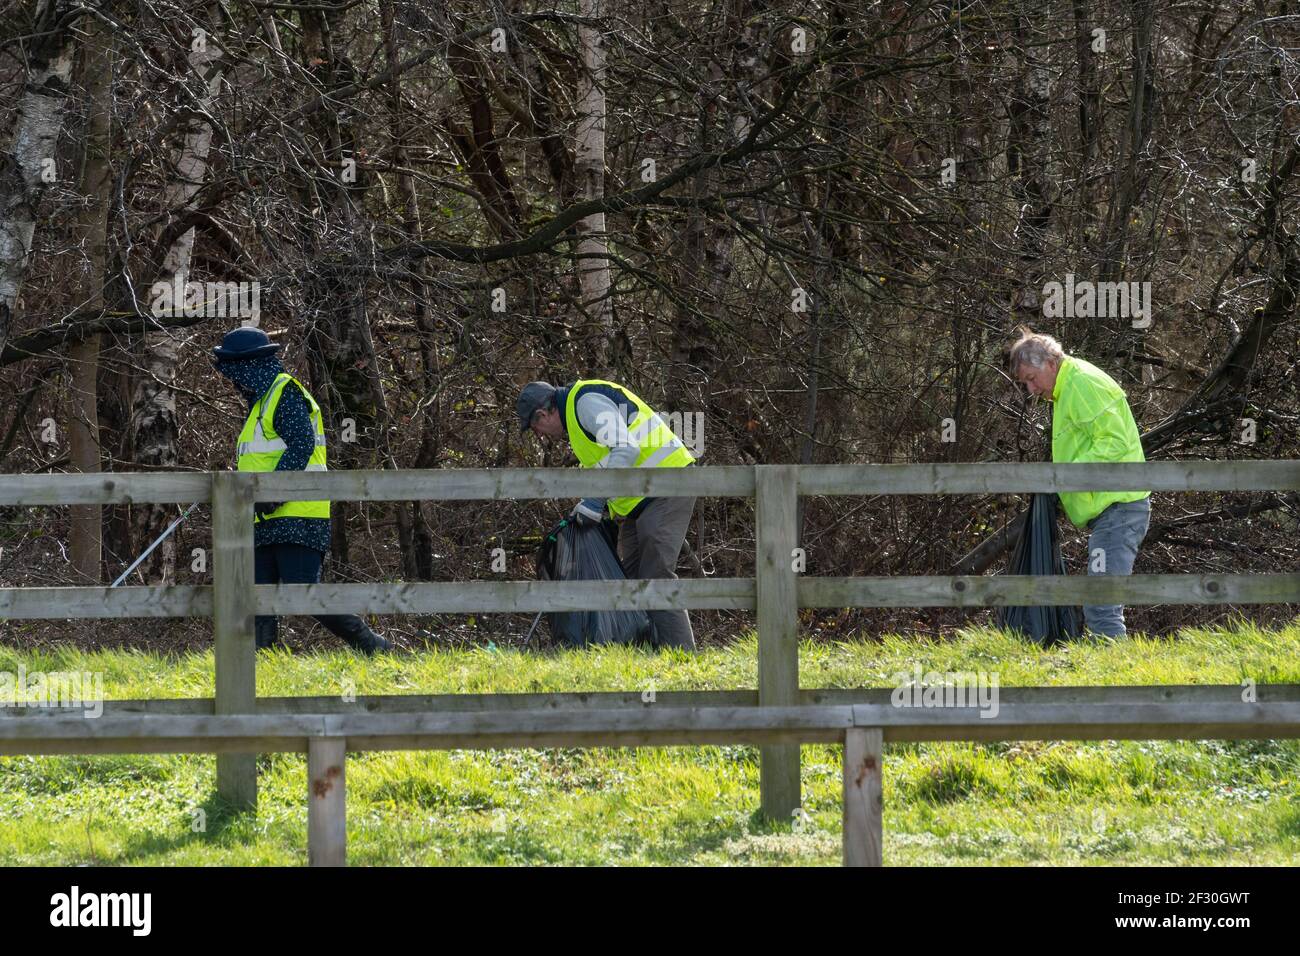 Volunteers litter picking in the countryside wearing high vis clothing, UK. Tidying up roadside verges. Stock Photo